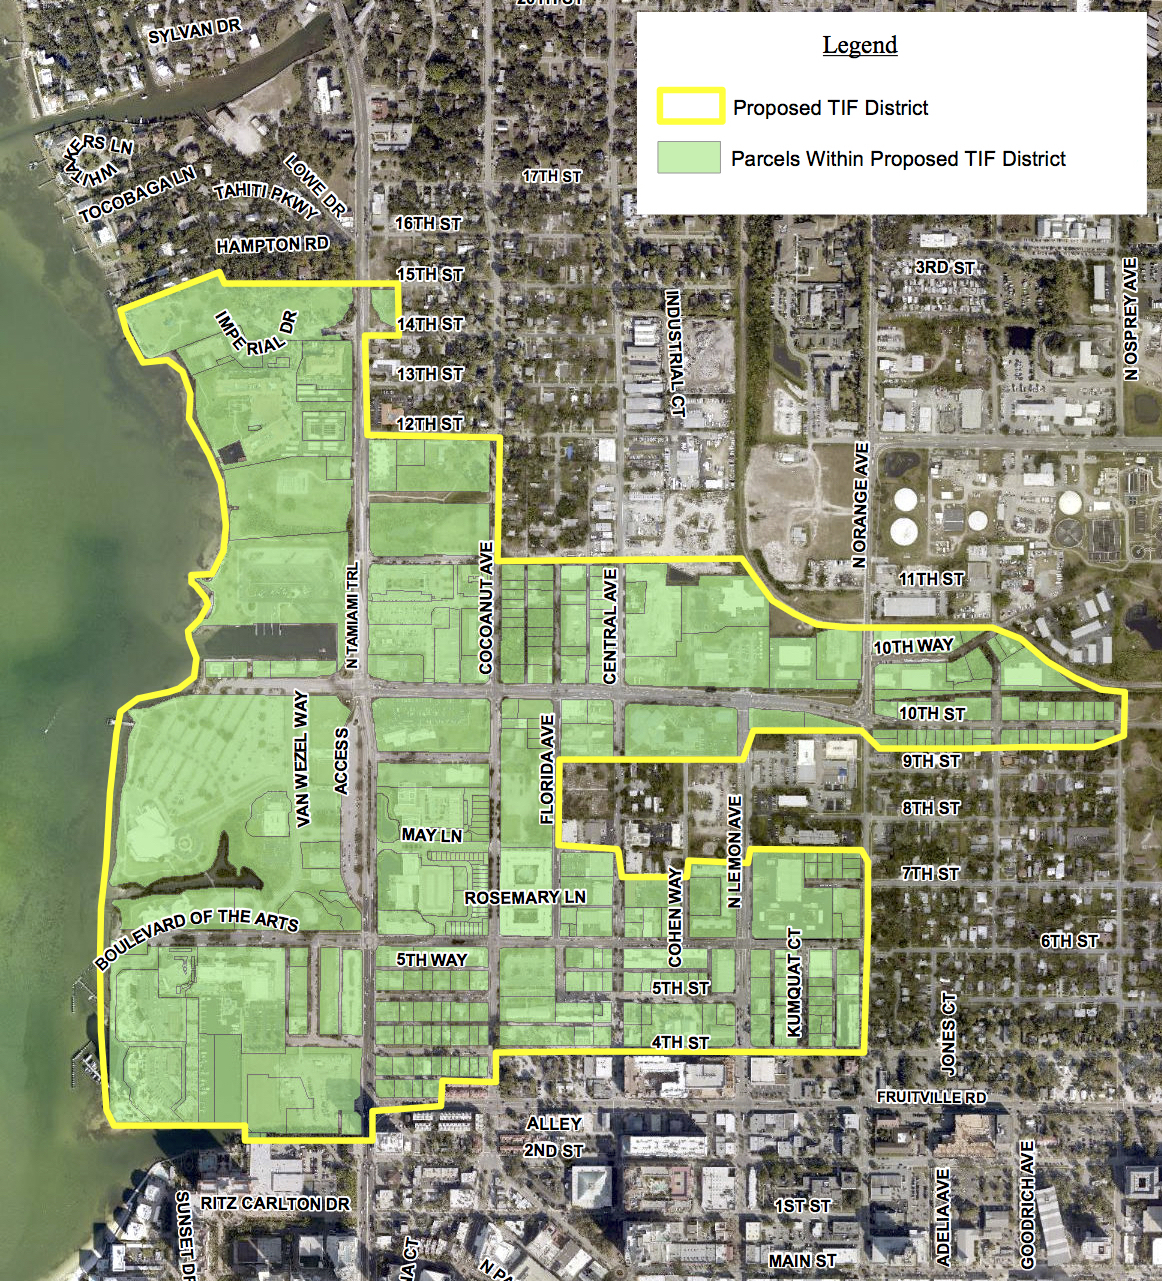 Within the TIF district, any increases in property tax revenue above the baseline year of 2019 would go toward bayfront redevelopment. Image courtesy city of Sarasota.